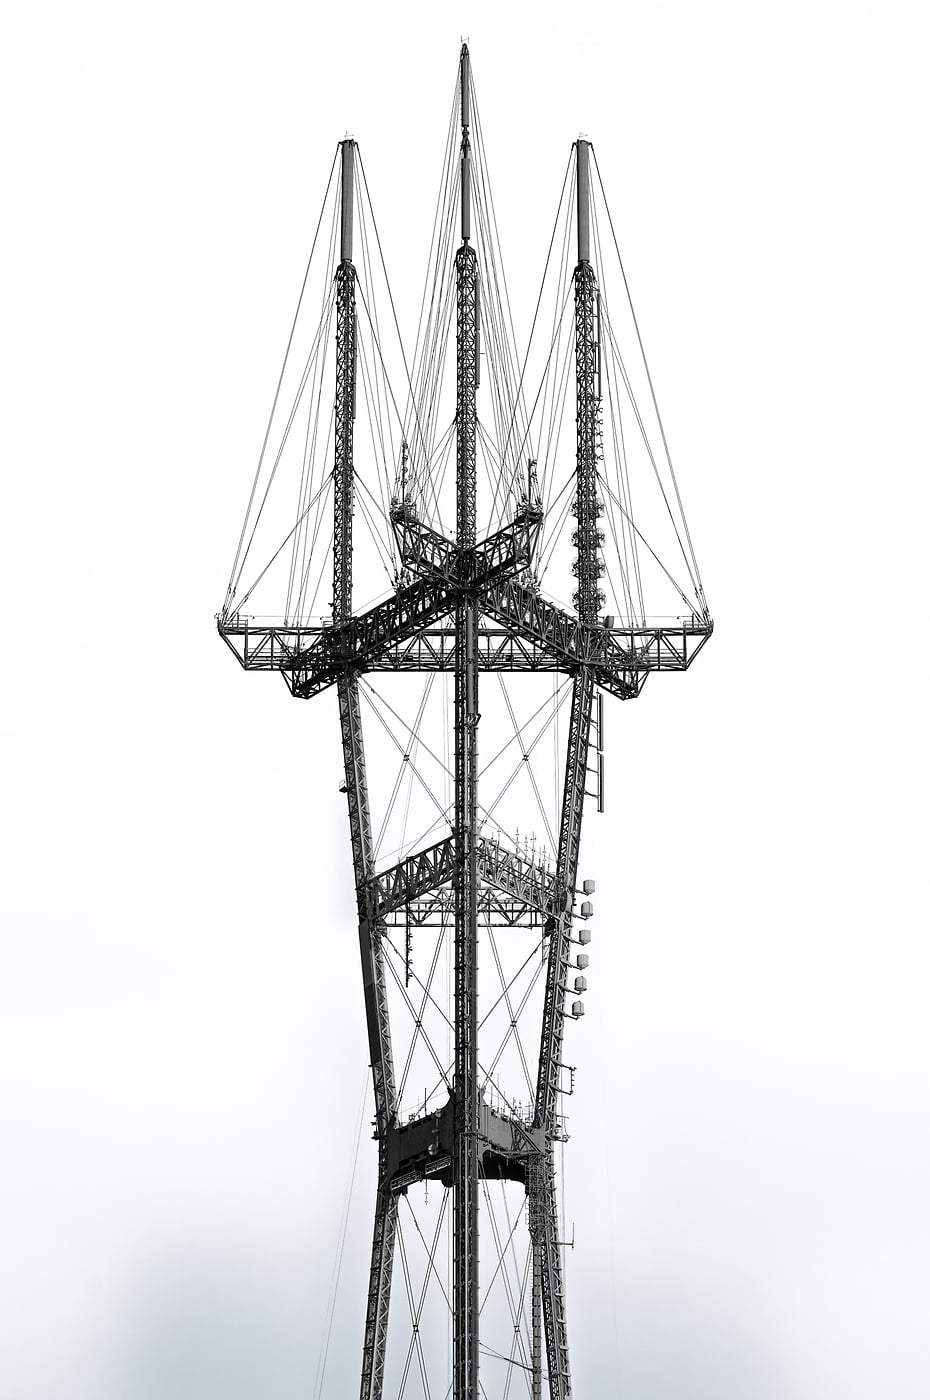 392 megapixels! A very high resolution, large-format VAST photo print of Sutro Tower; photograph created by Nicholas Gonzales in San Francisco, California.